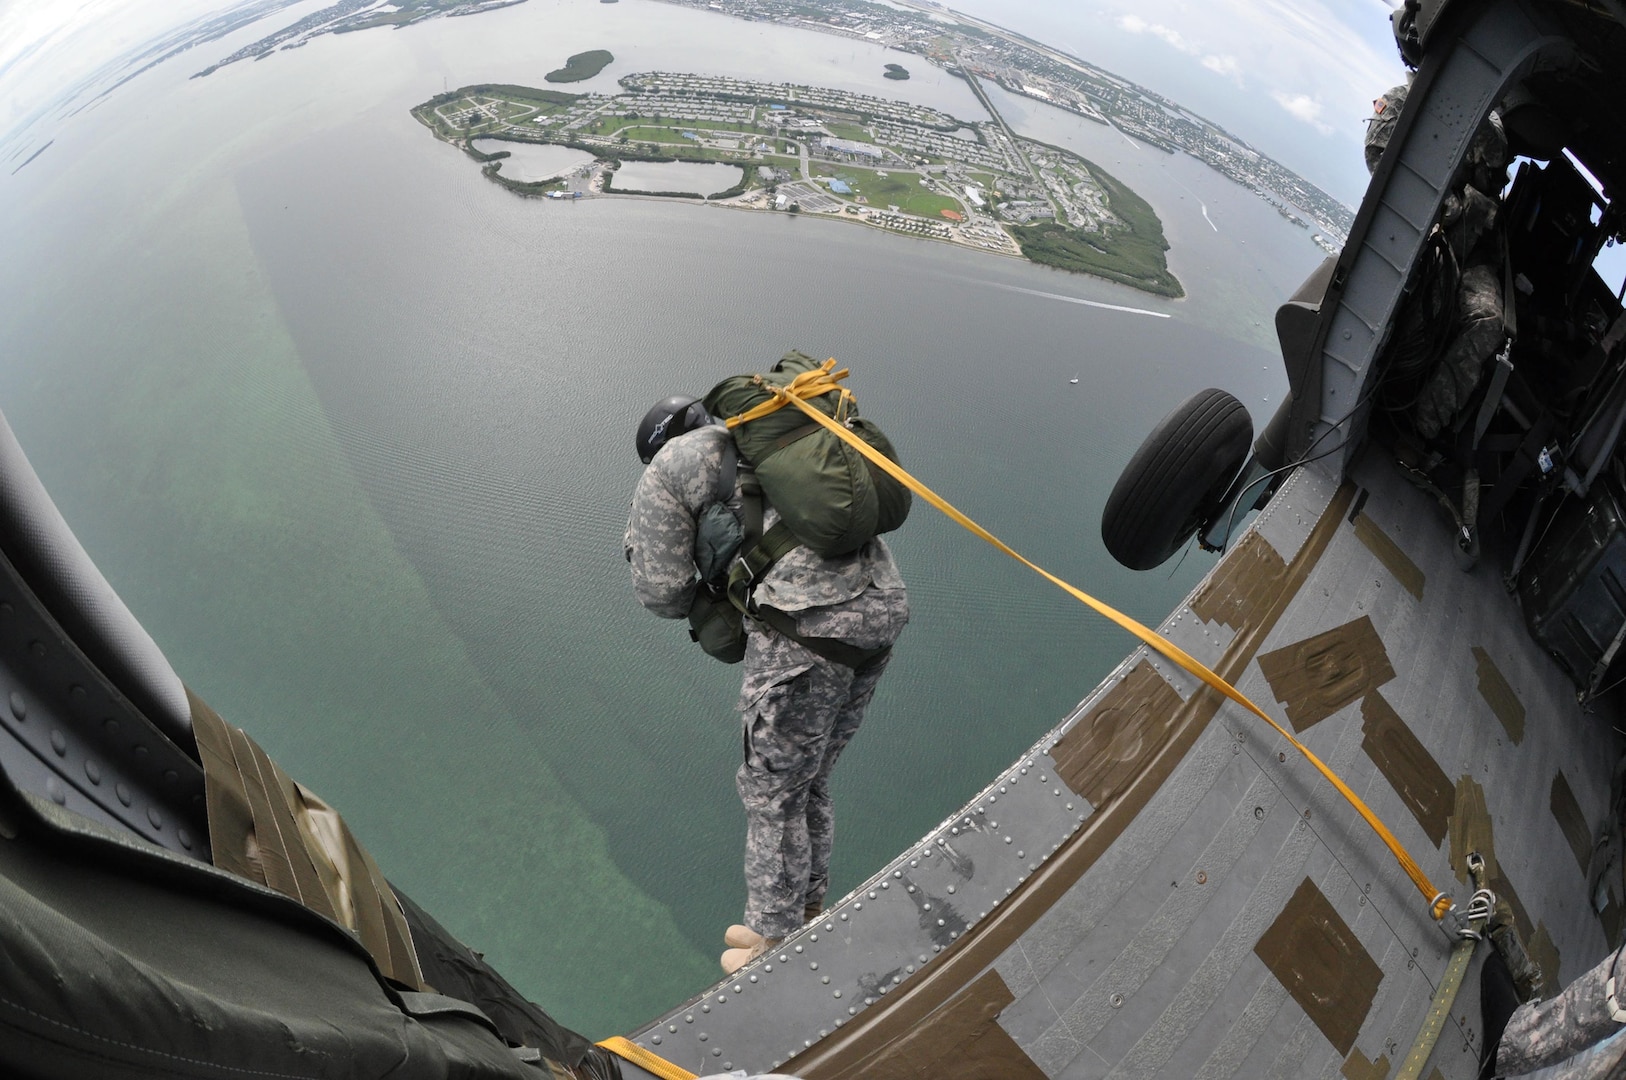 A member of the Florida Army National Guard's Charlie Company, 3rd Battalion, 20th Special Forces Group, exits a UH-60 Black Hawk helicopter during an airborne training exercise in Key West, Fla., Sept. 27, 2012.